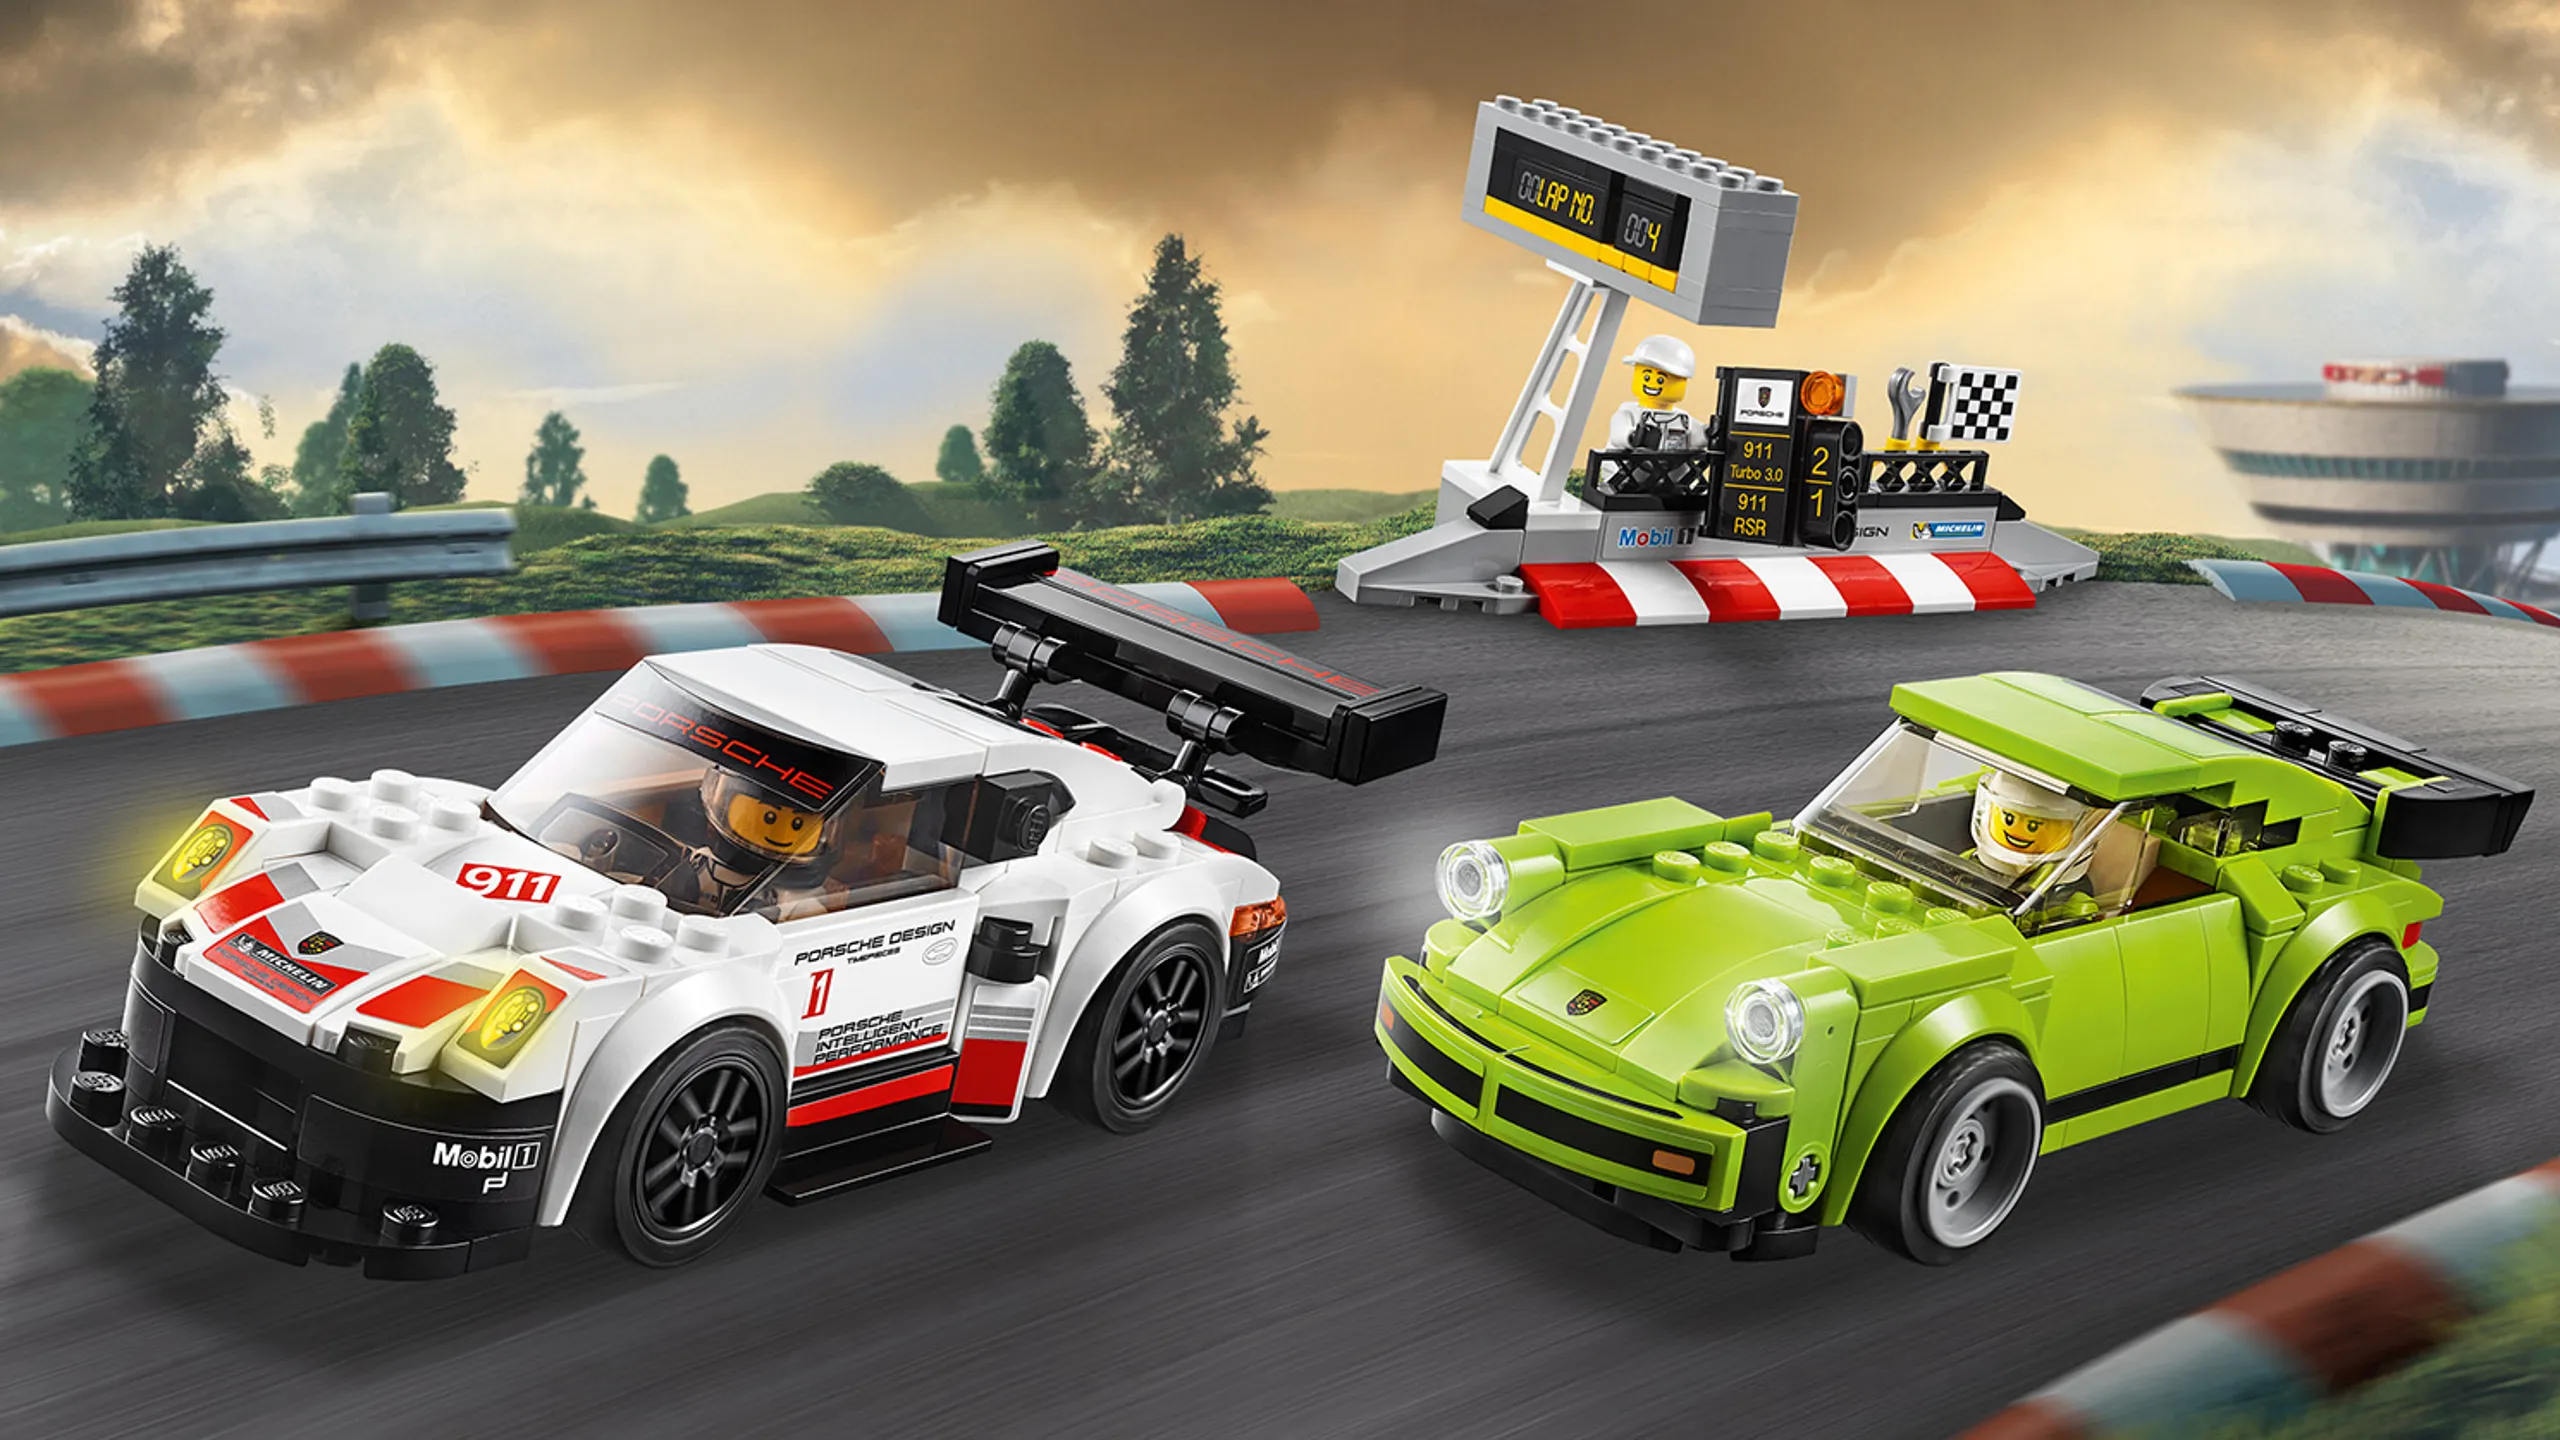 LEGO Speed Champions - 75888 Porsche 911 RSR and 911 Turbo 3.0 - Head to the track for an action-packed race between the LEGO® Speed Champions Porsche 911 RSR and 911 Turbo 3.0 cars.